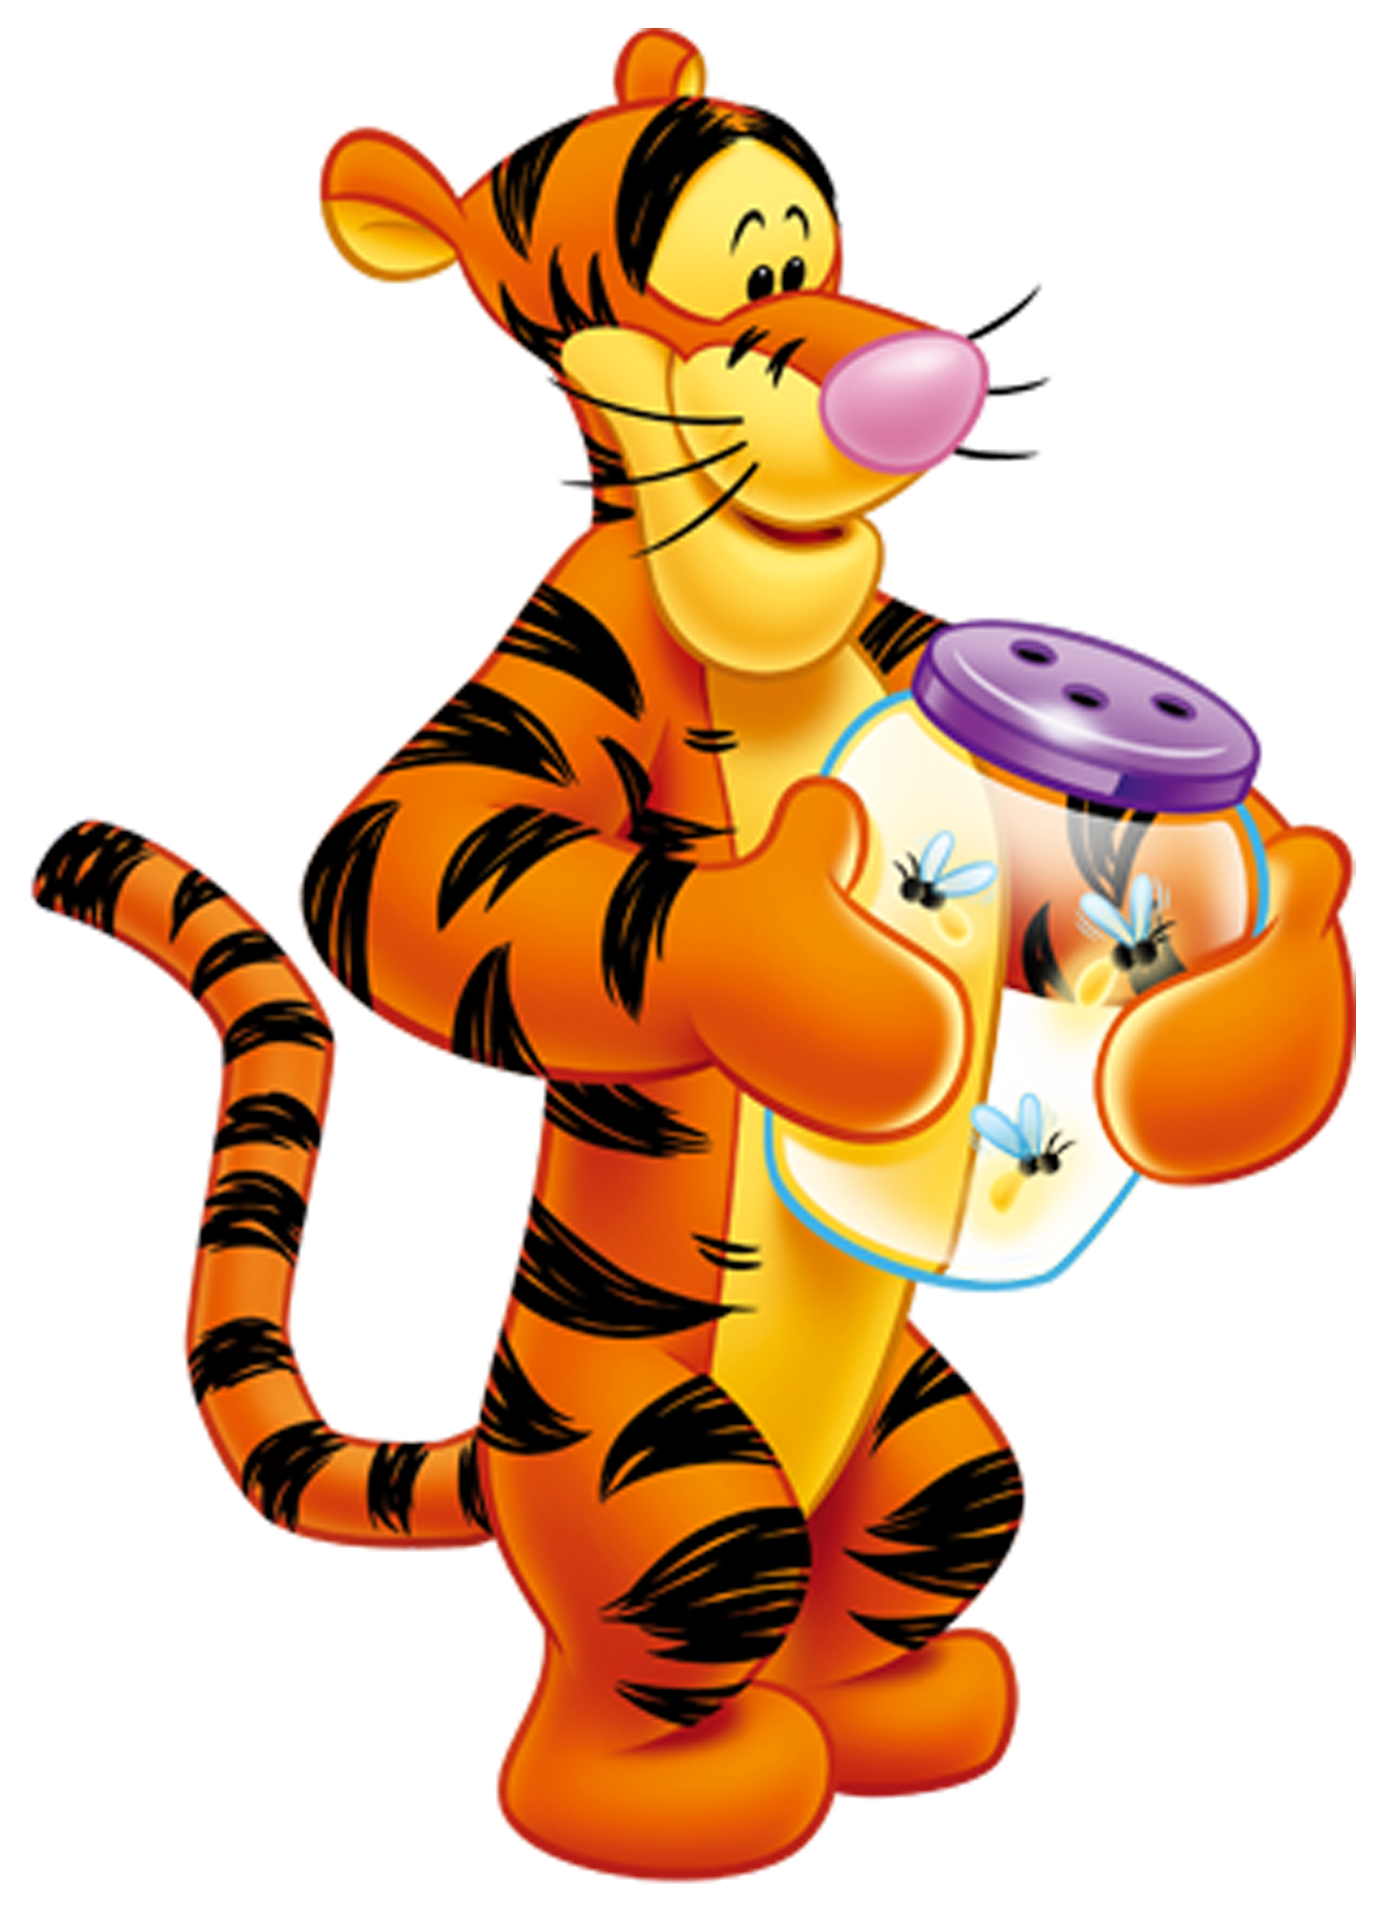 Download PNG image - Winnie The Pooh PNG Image 